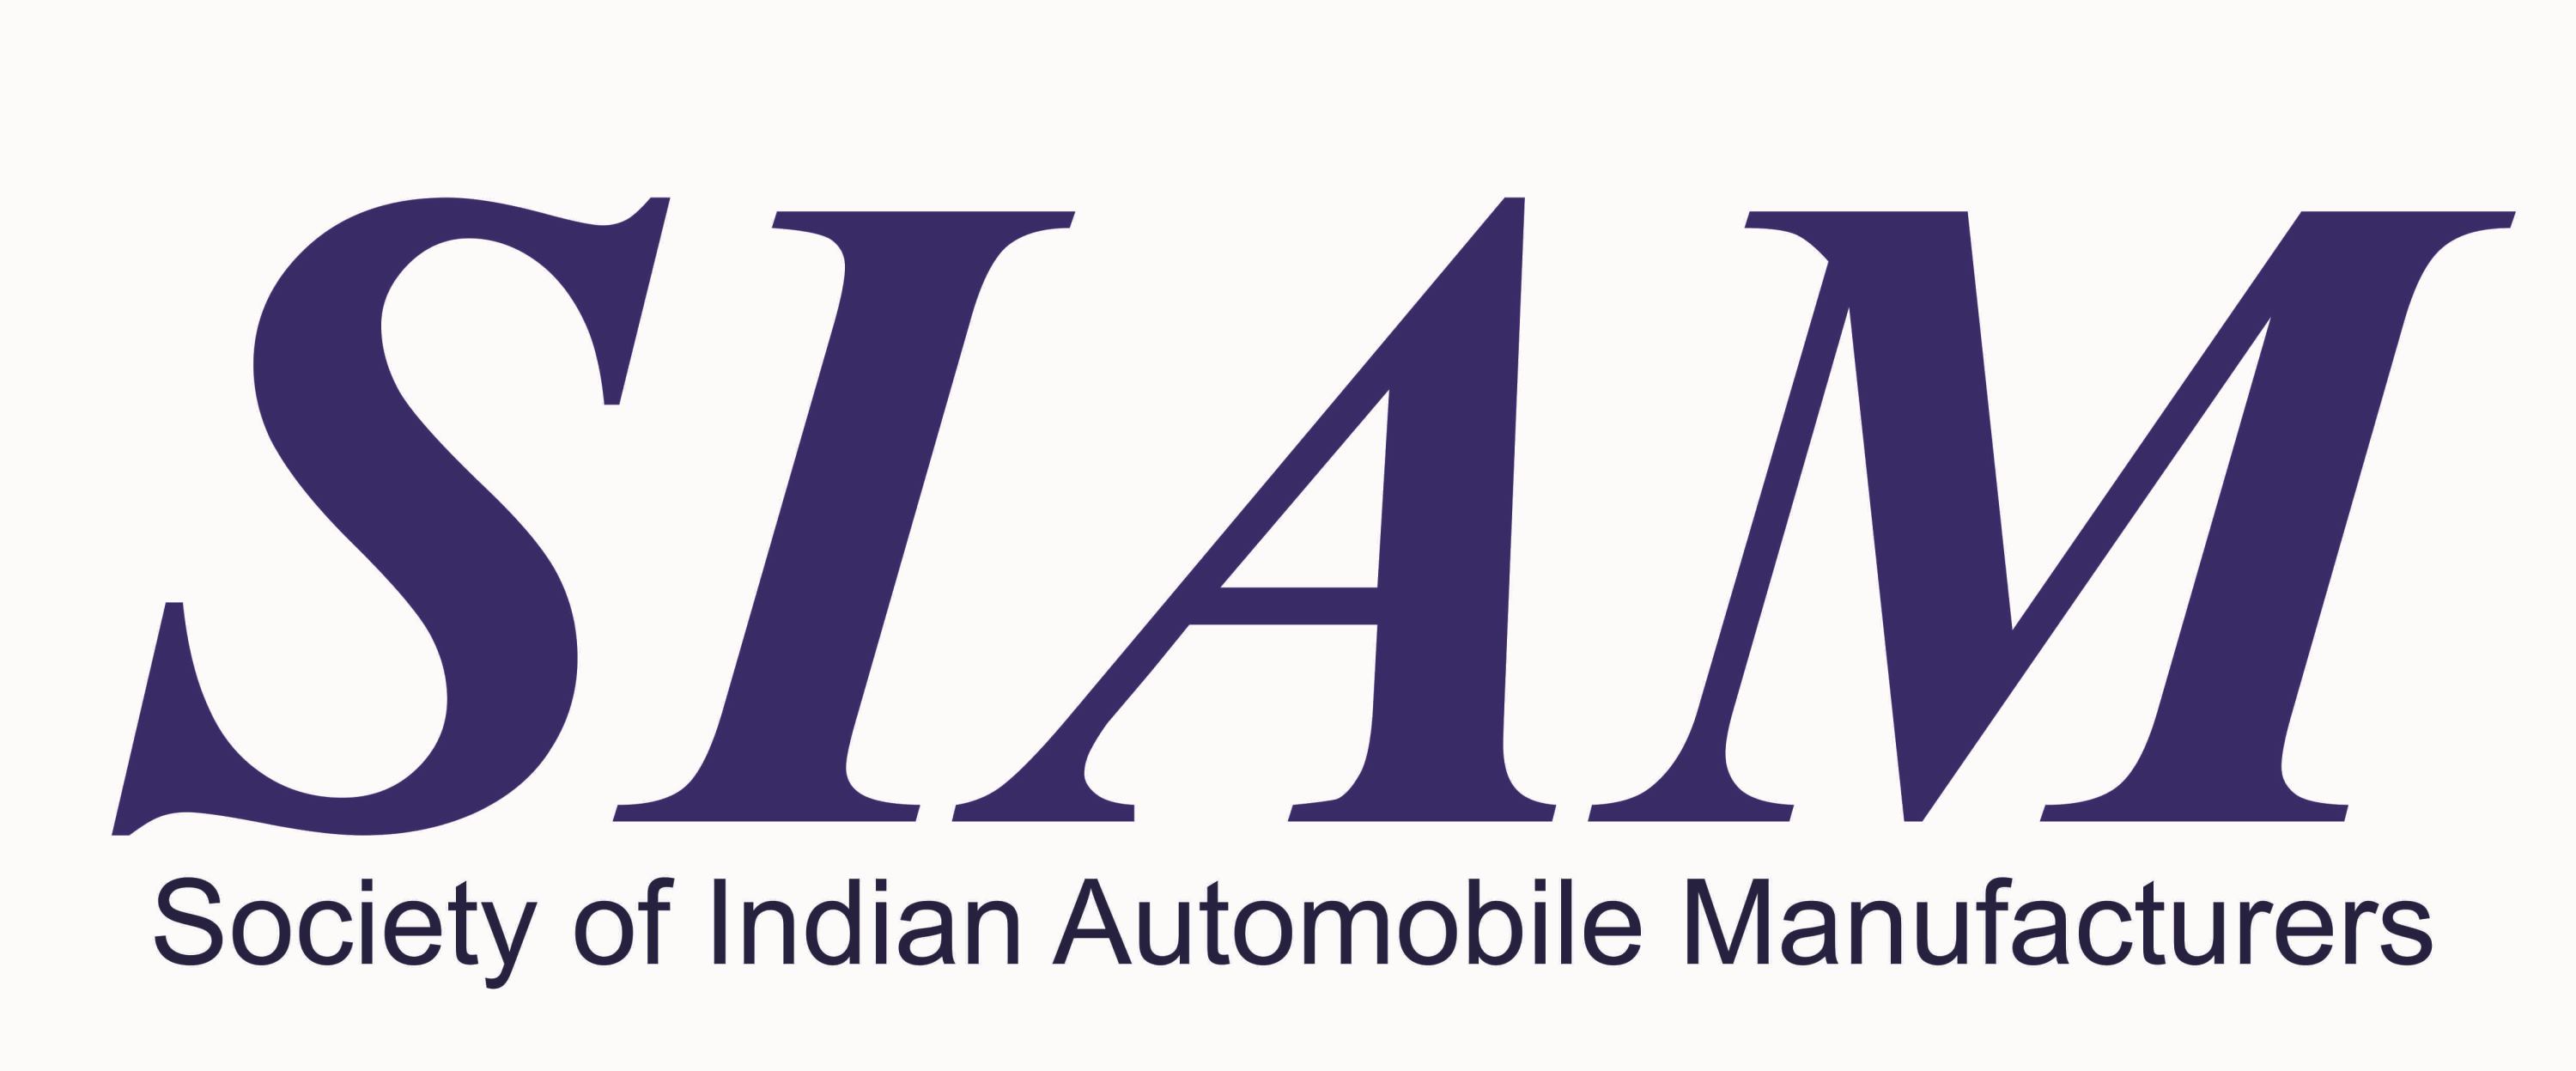 Society of Indian Automobile Manufacturers (SIAM)